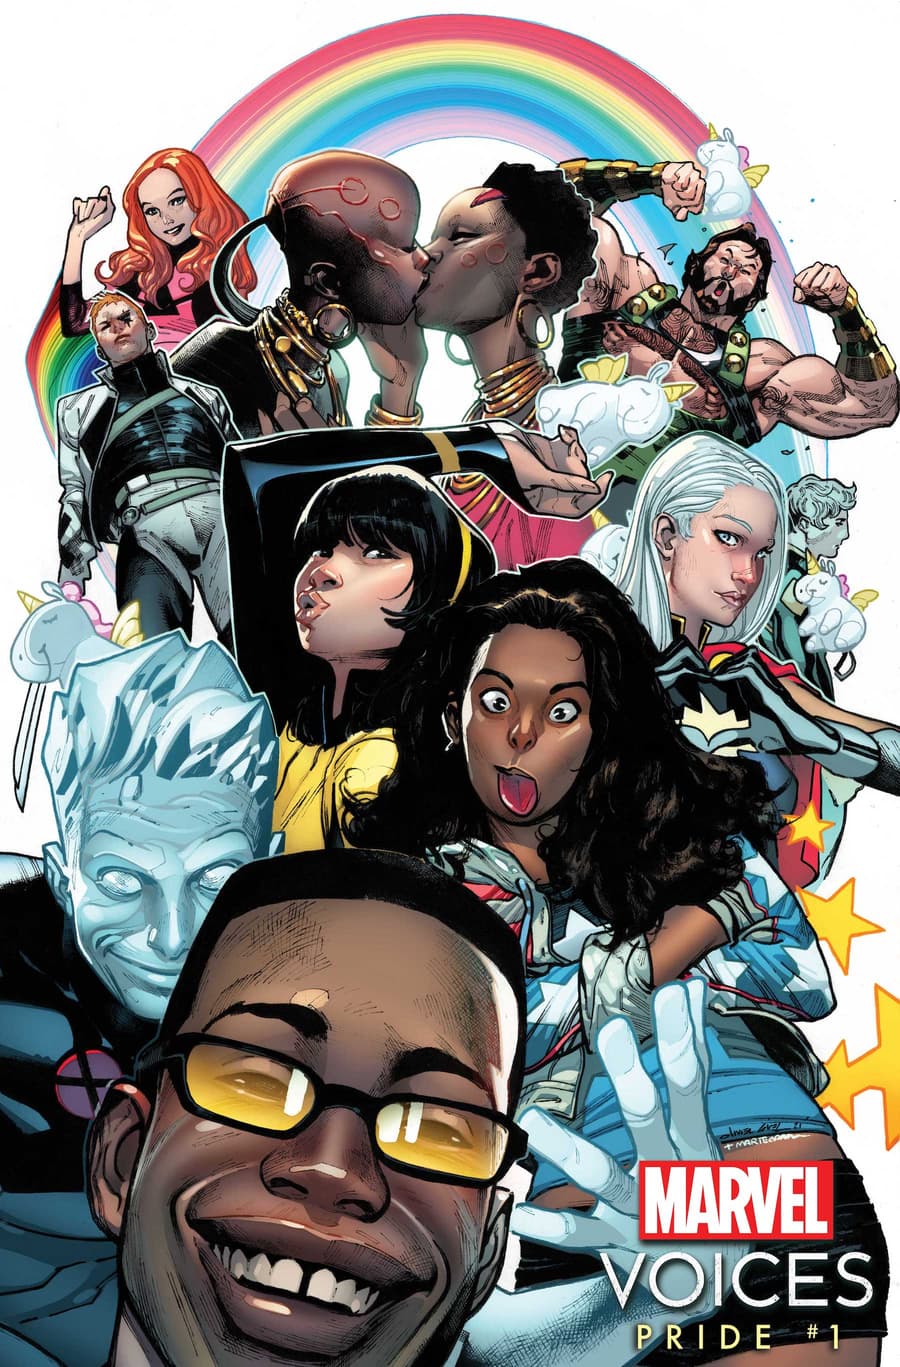 MARVEL’S VOICES: PRIDE #1 variant by Olivier Coipel